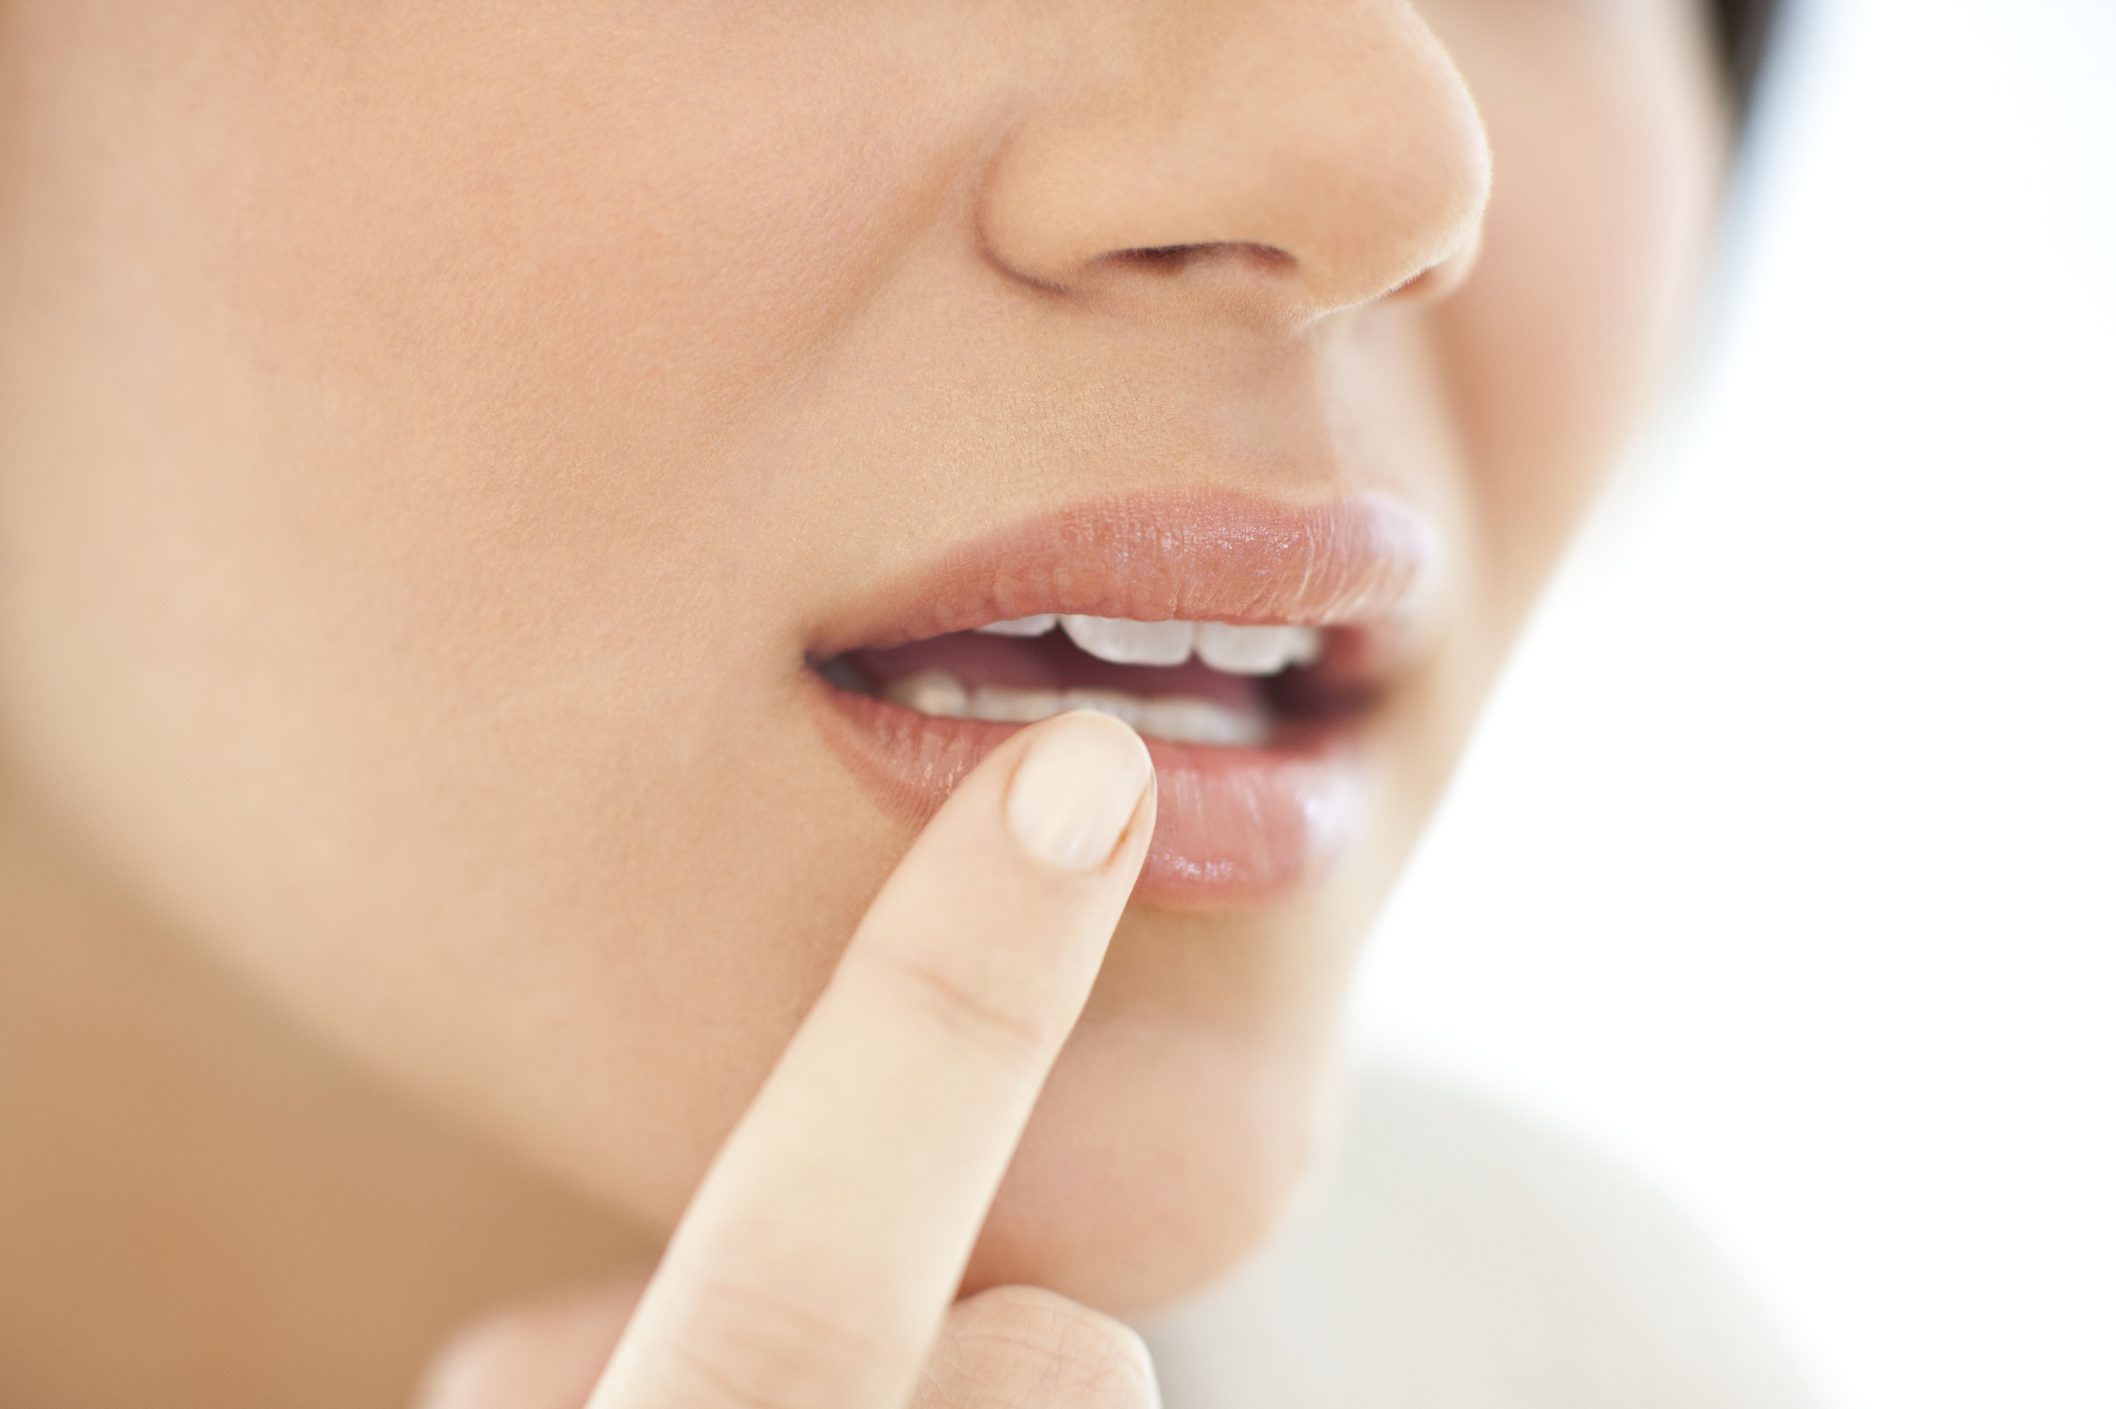 What Is the Difference Between a Fever Blister and a Cold Sore?